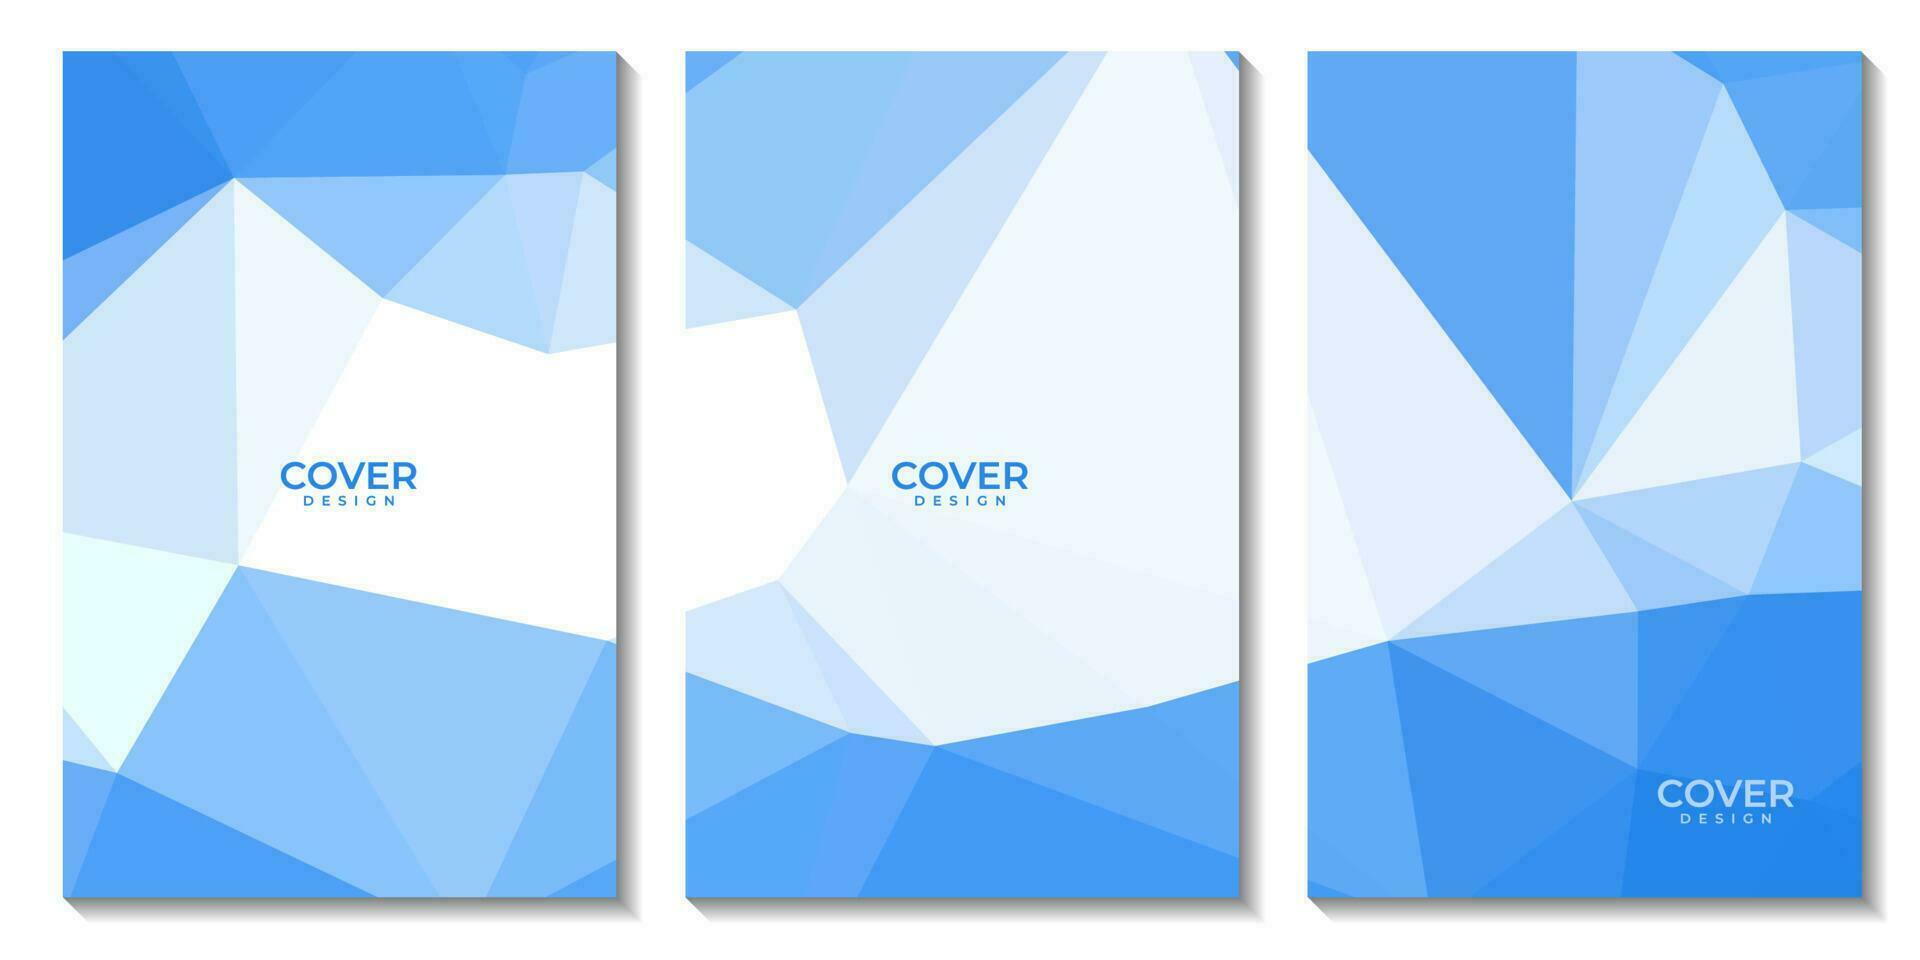 covers set abstract blue and white geometric background with triangles vector